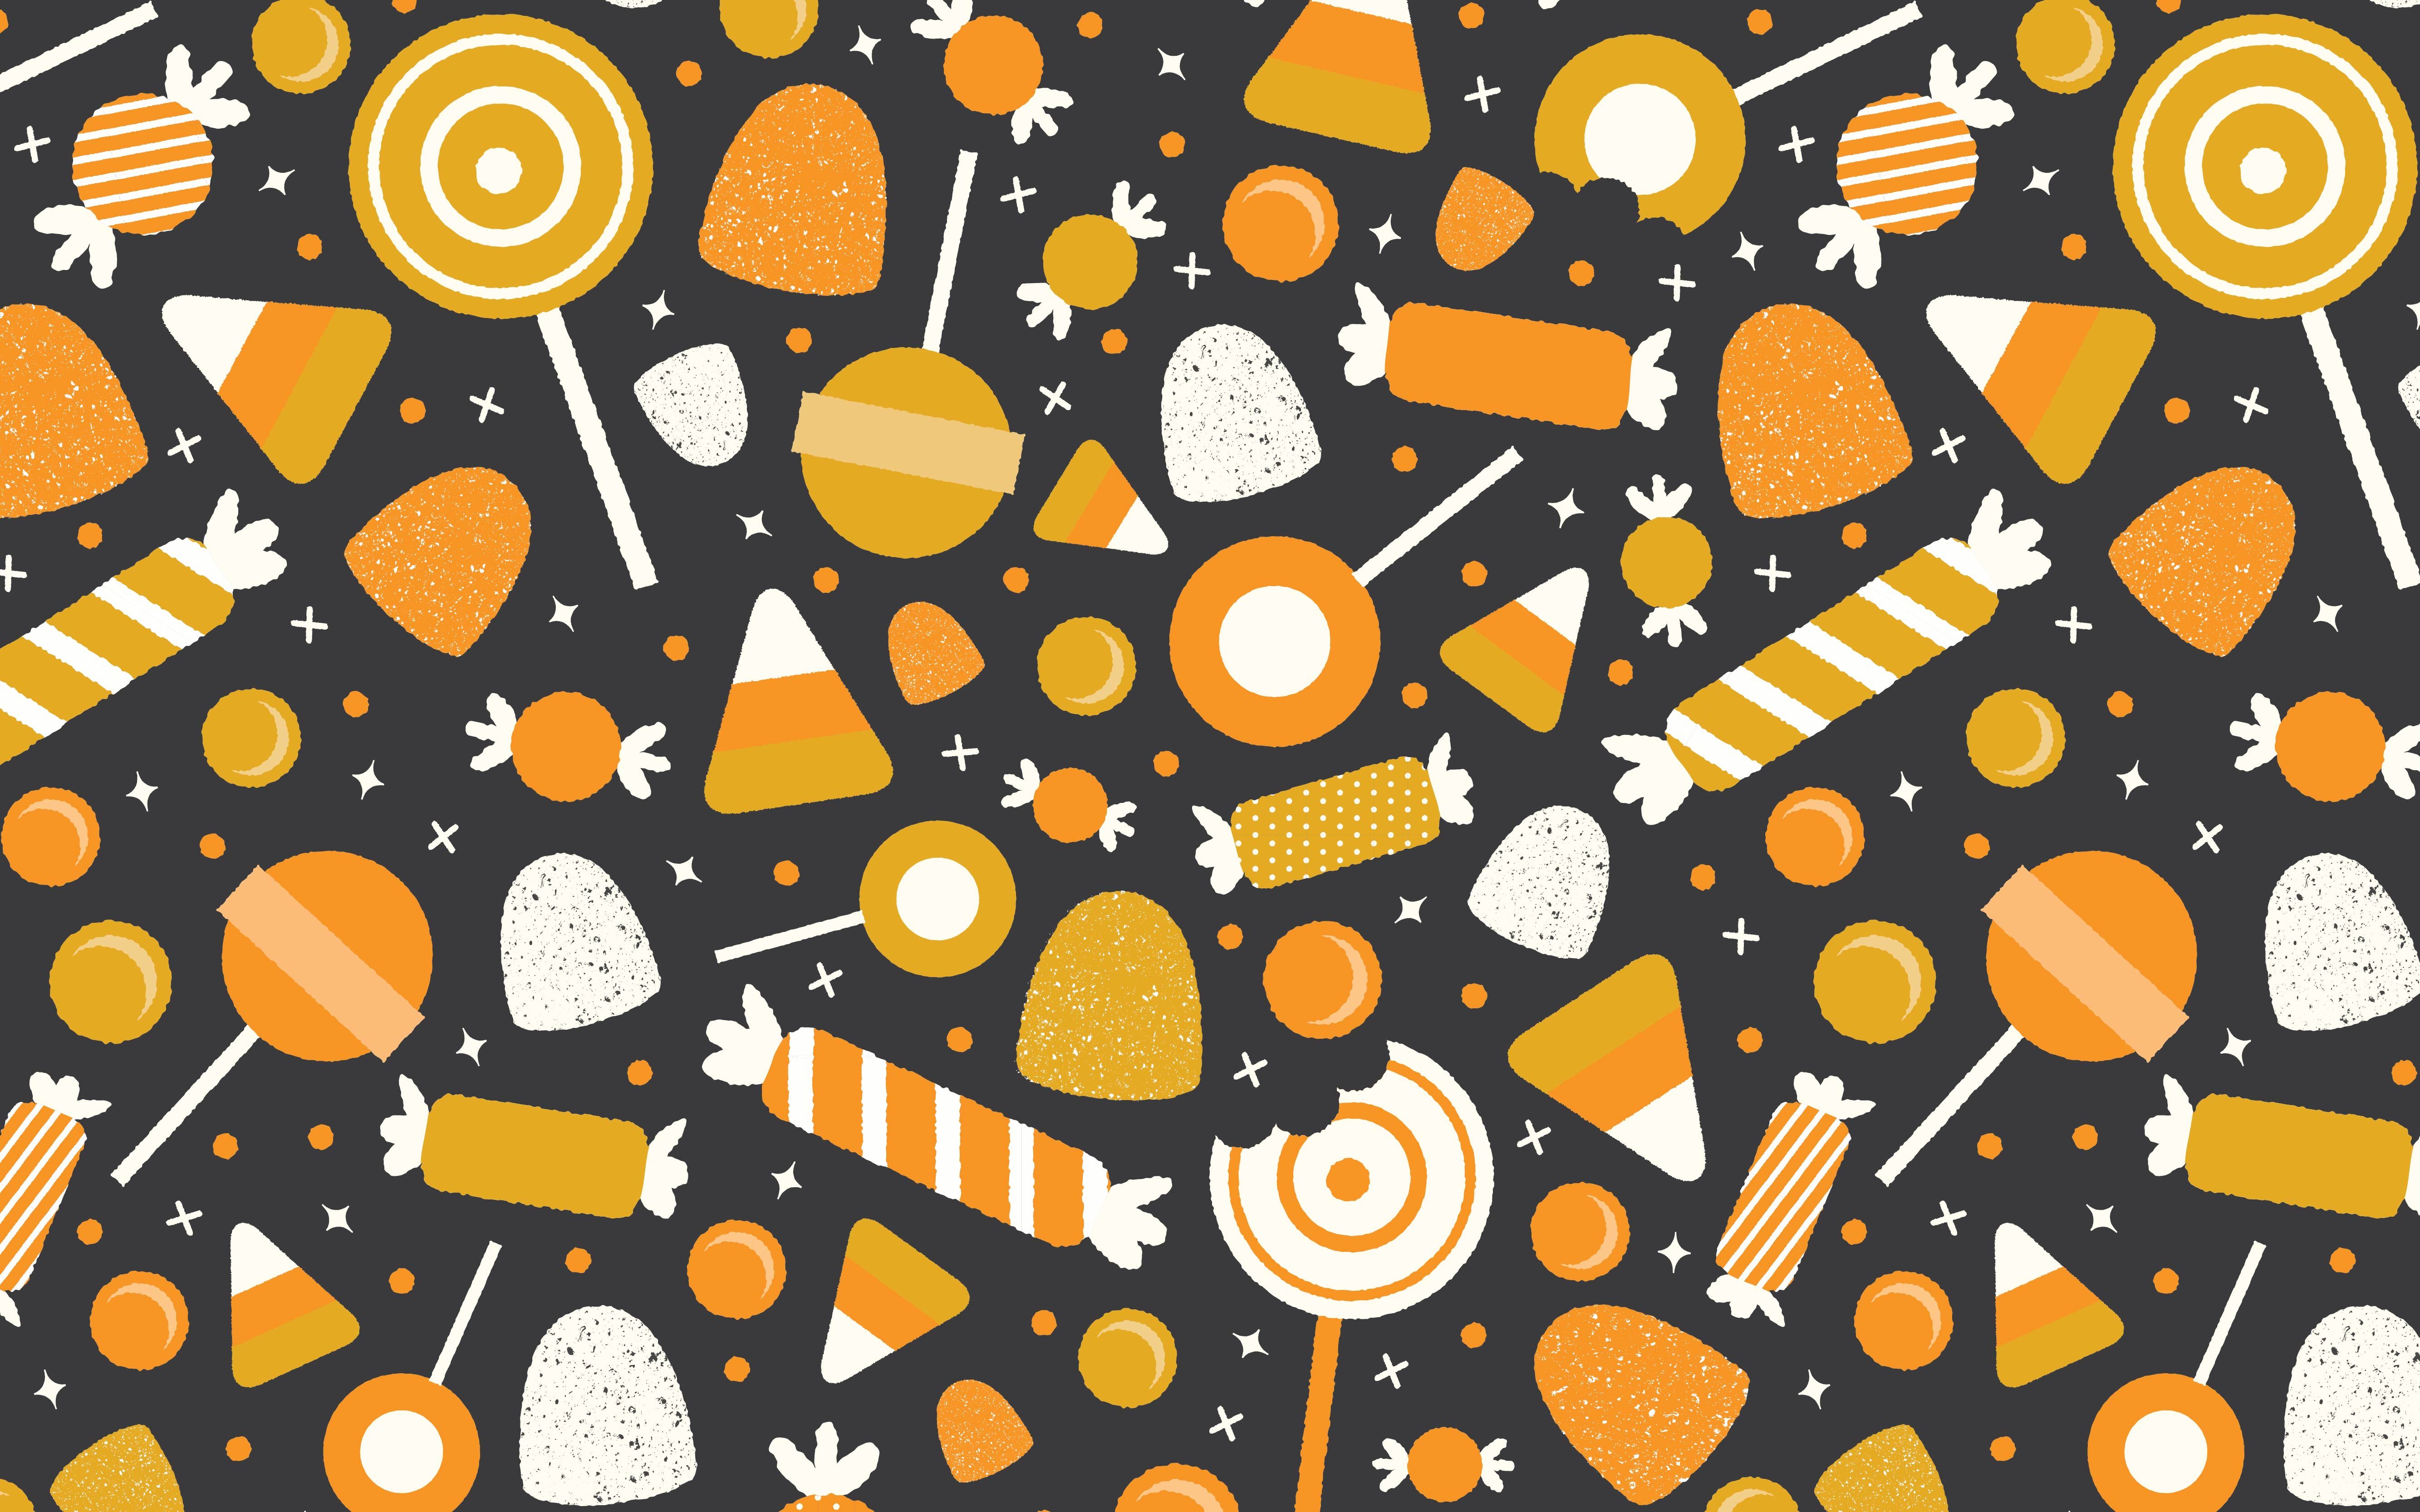 A pattern of candy and other items on black background - Halloween desktop, cute Halloween